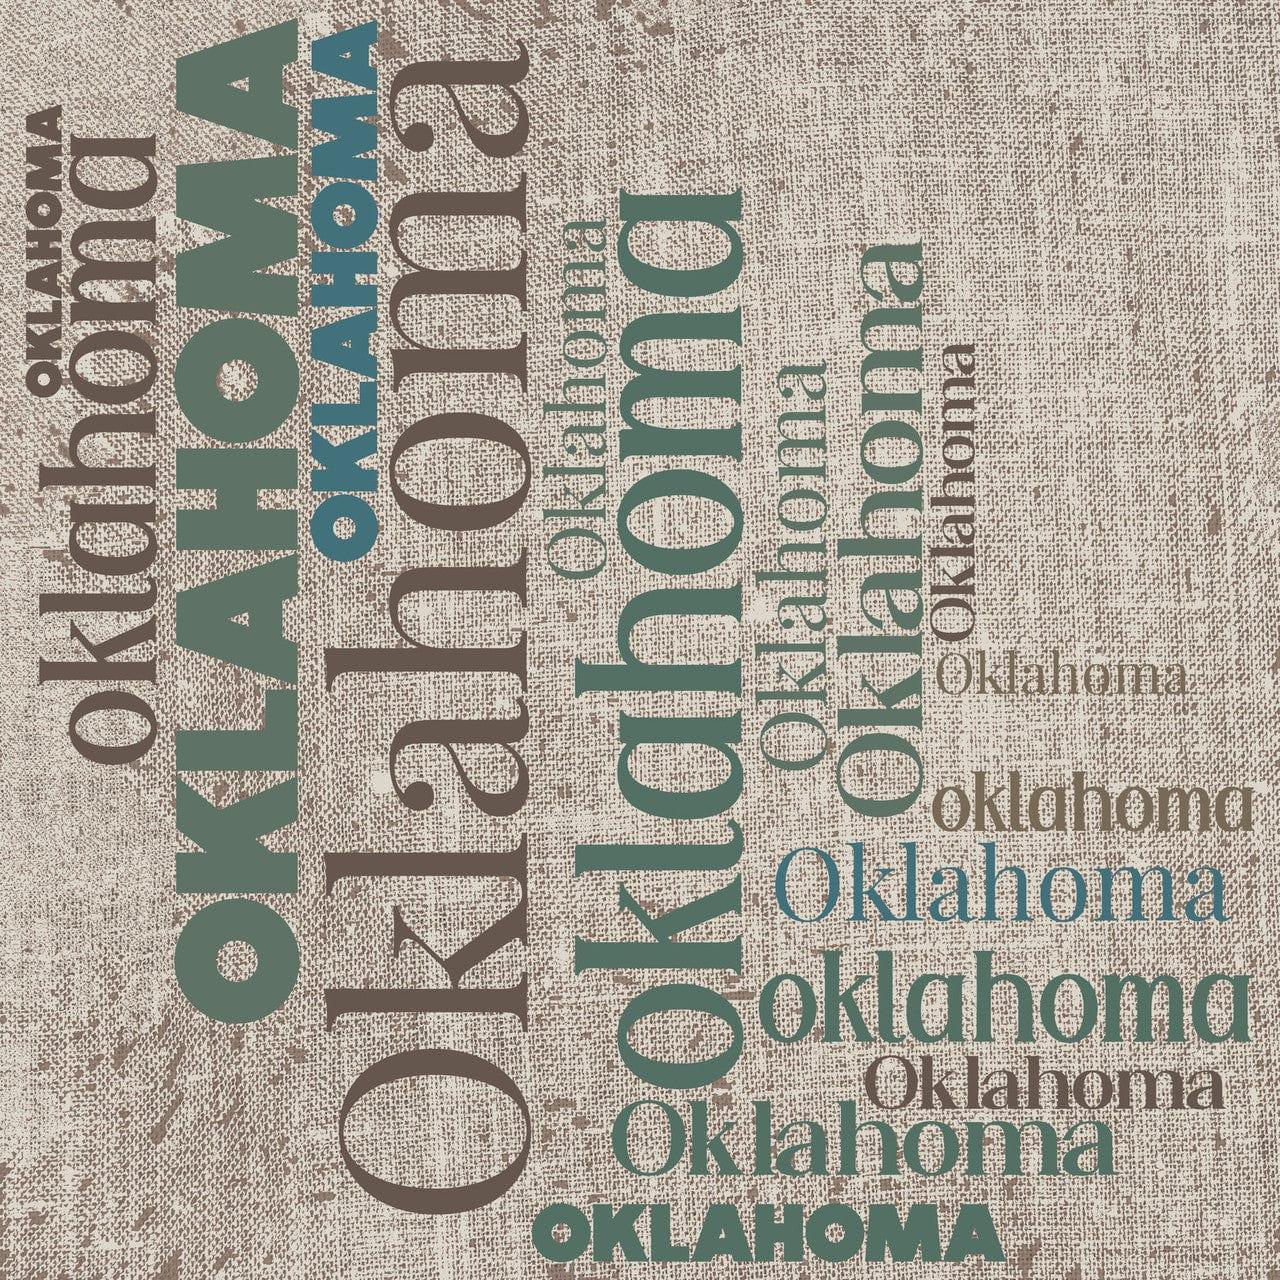 Stateside Collection Oklahoma 12 x 12 Double-Sided Scrapbook Paper by SSC Designs - Scrapbook Supply Companies